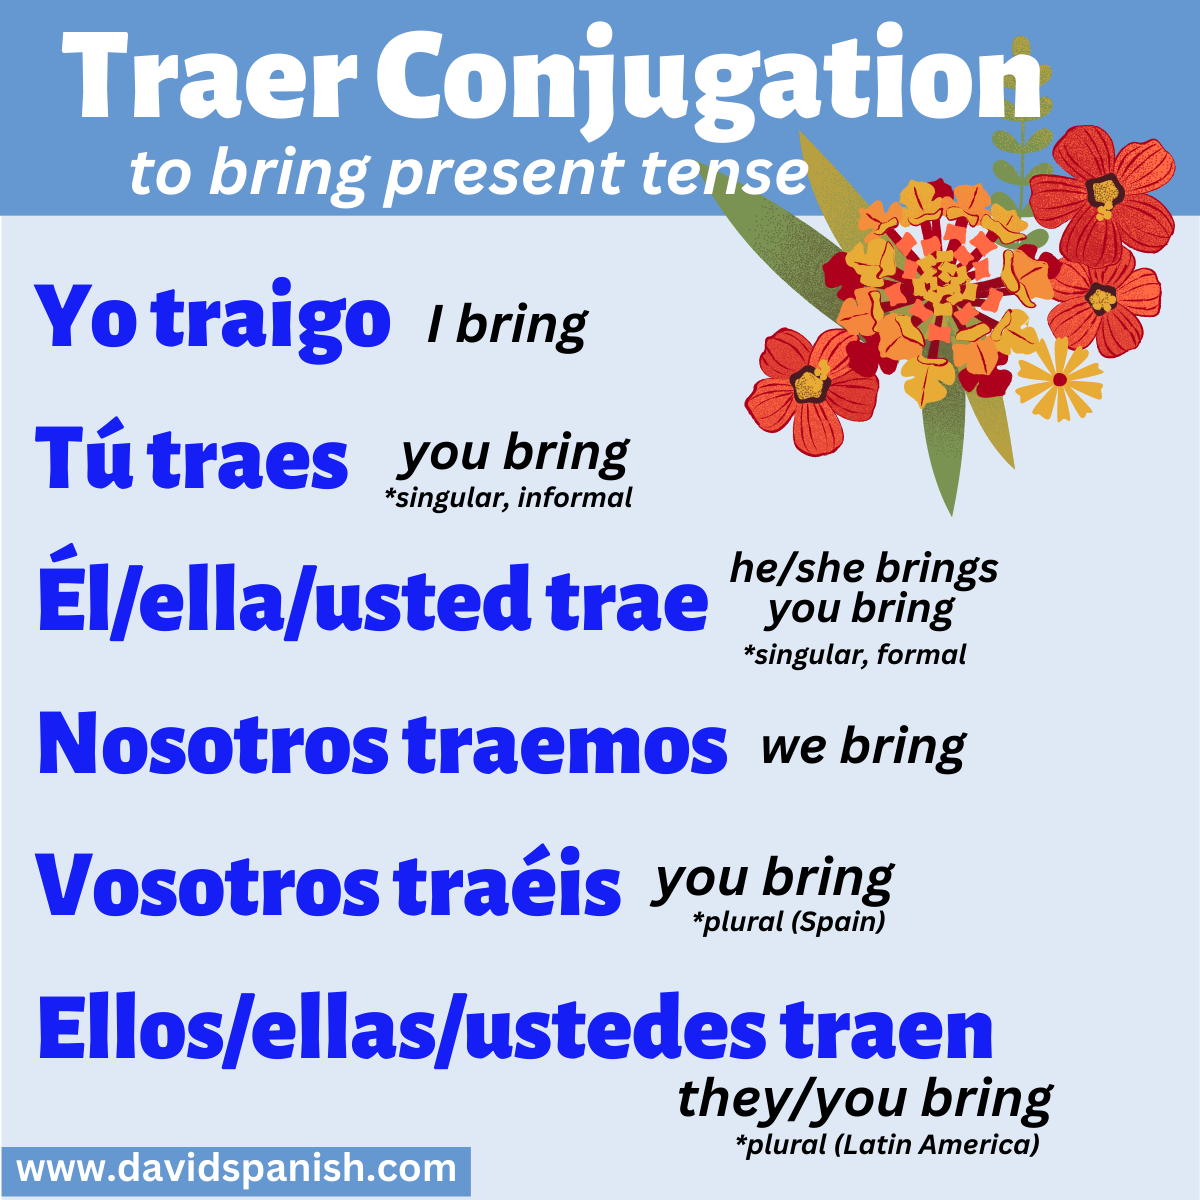 Traer (to bring) conjugated in the present tense